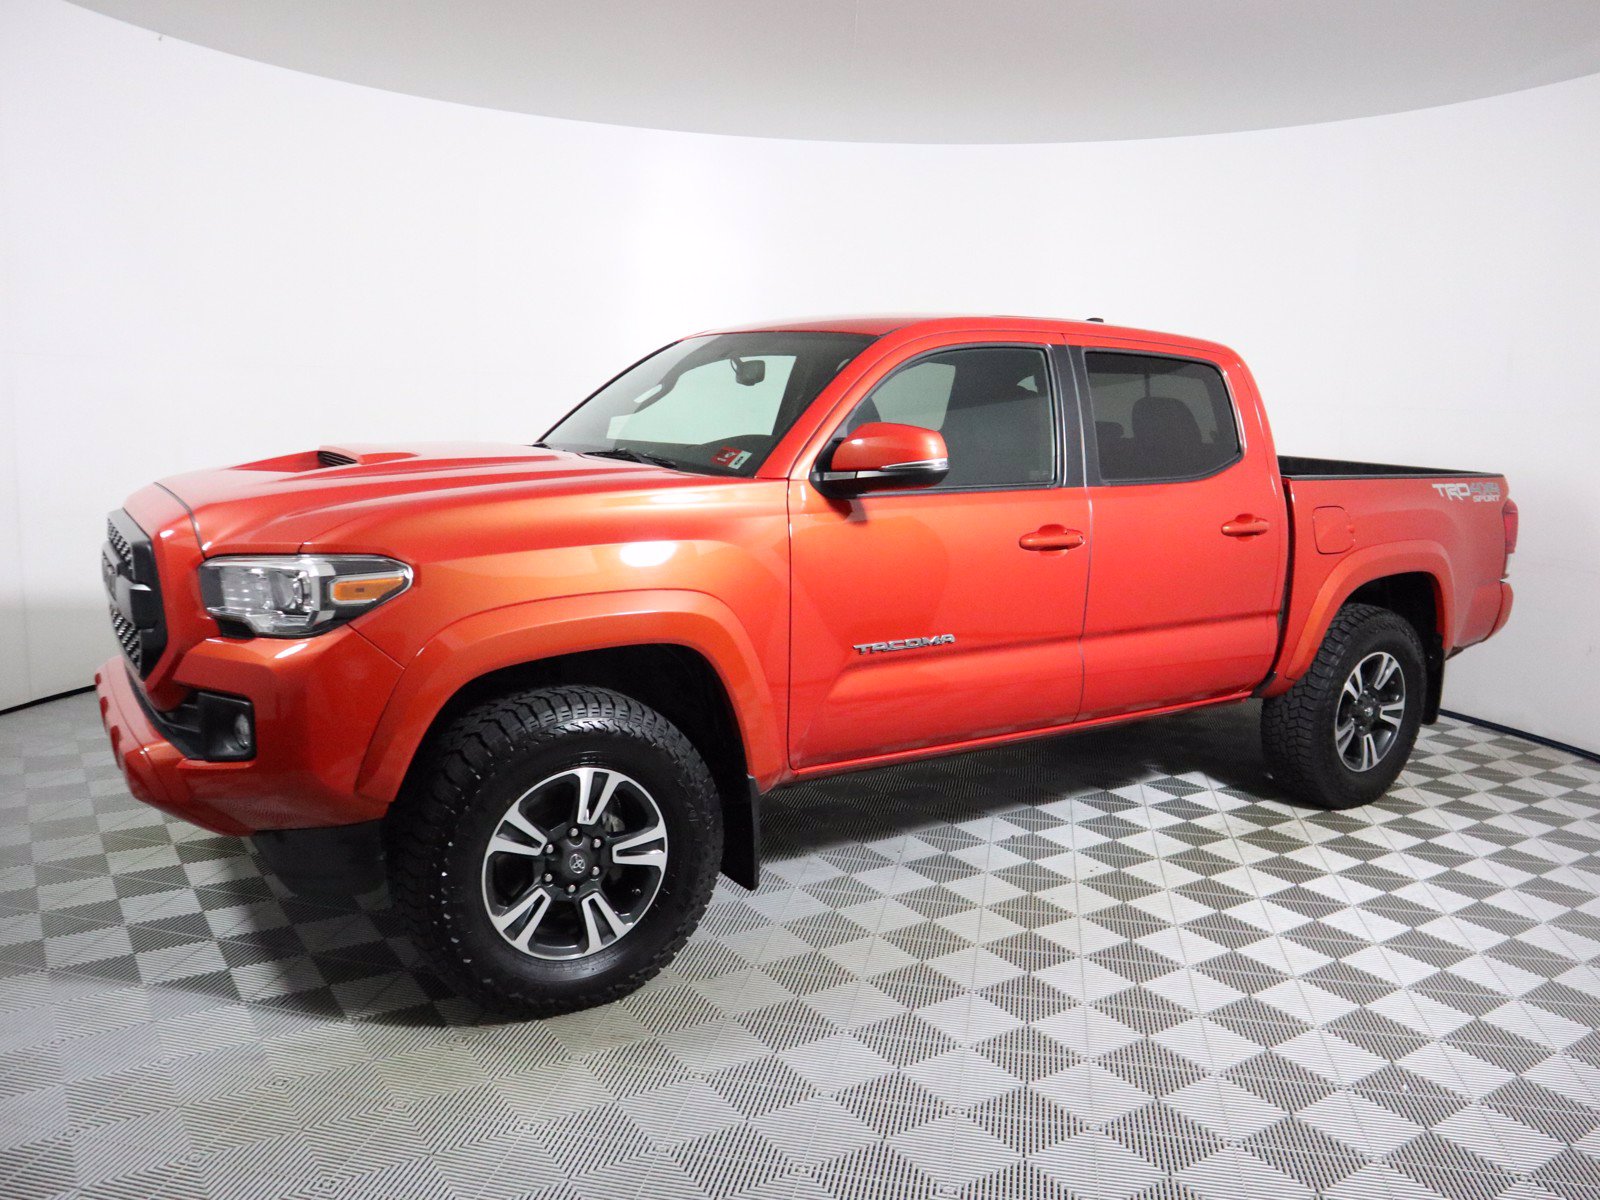 Pre-Owned 2017 Toyota Tacoma Crew Cab Pickup in Parkersburg #F20017A